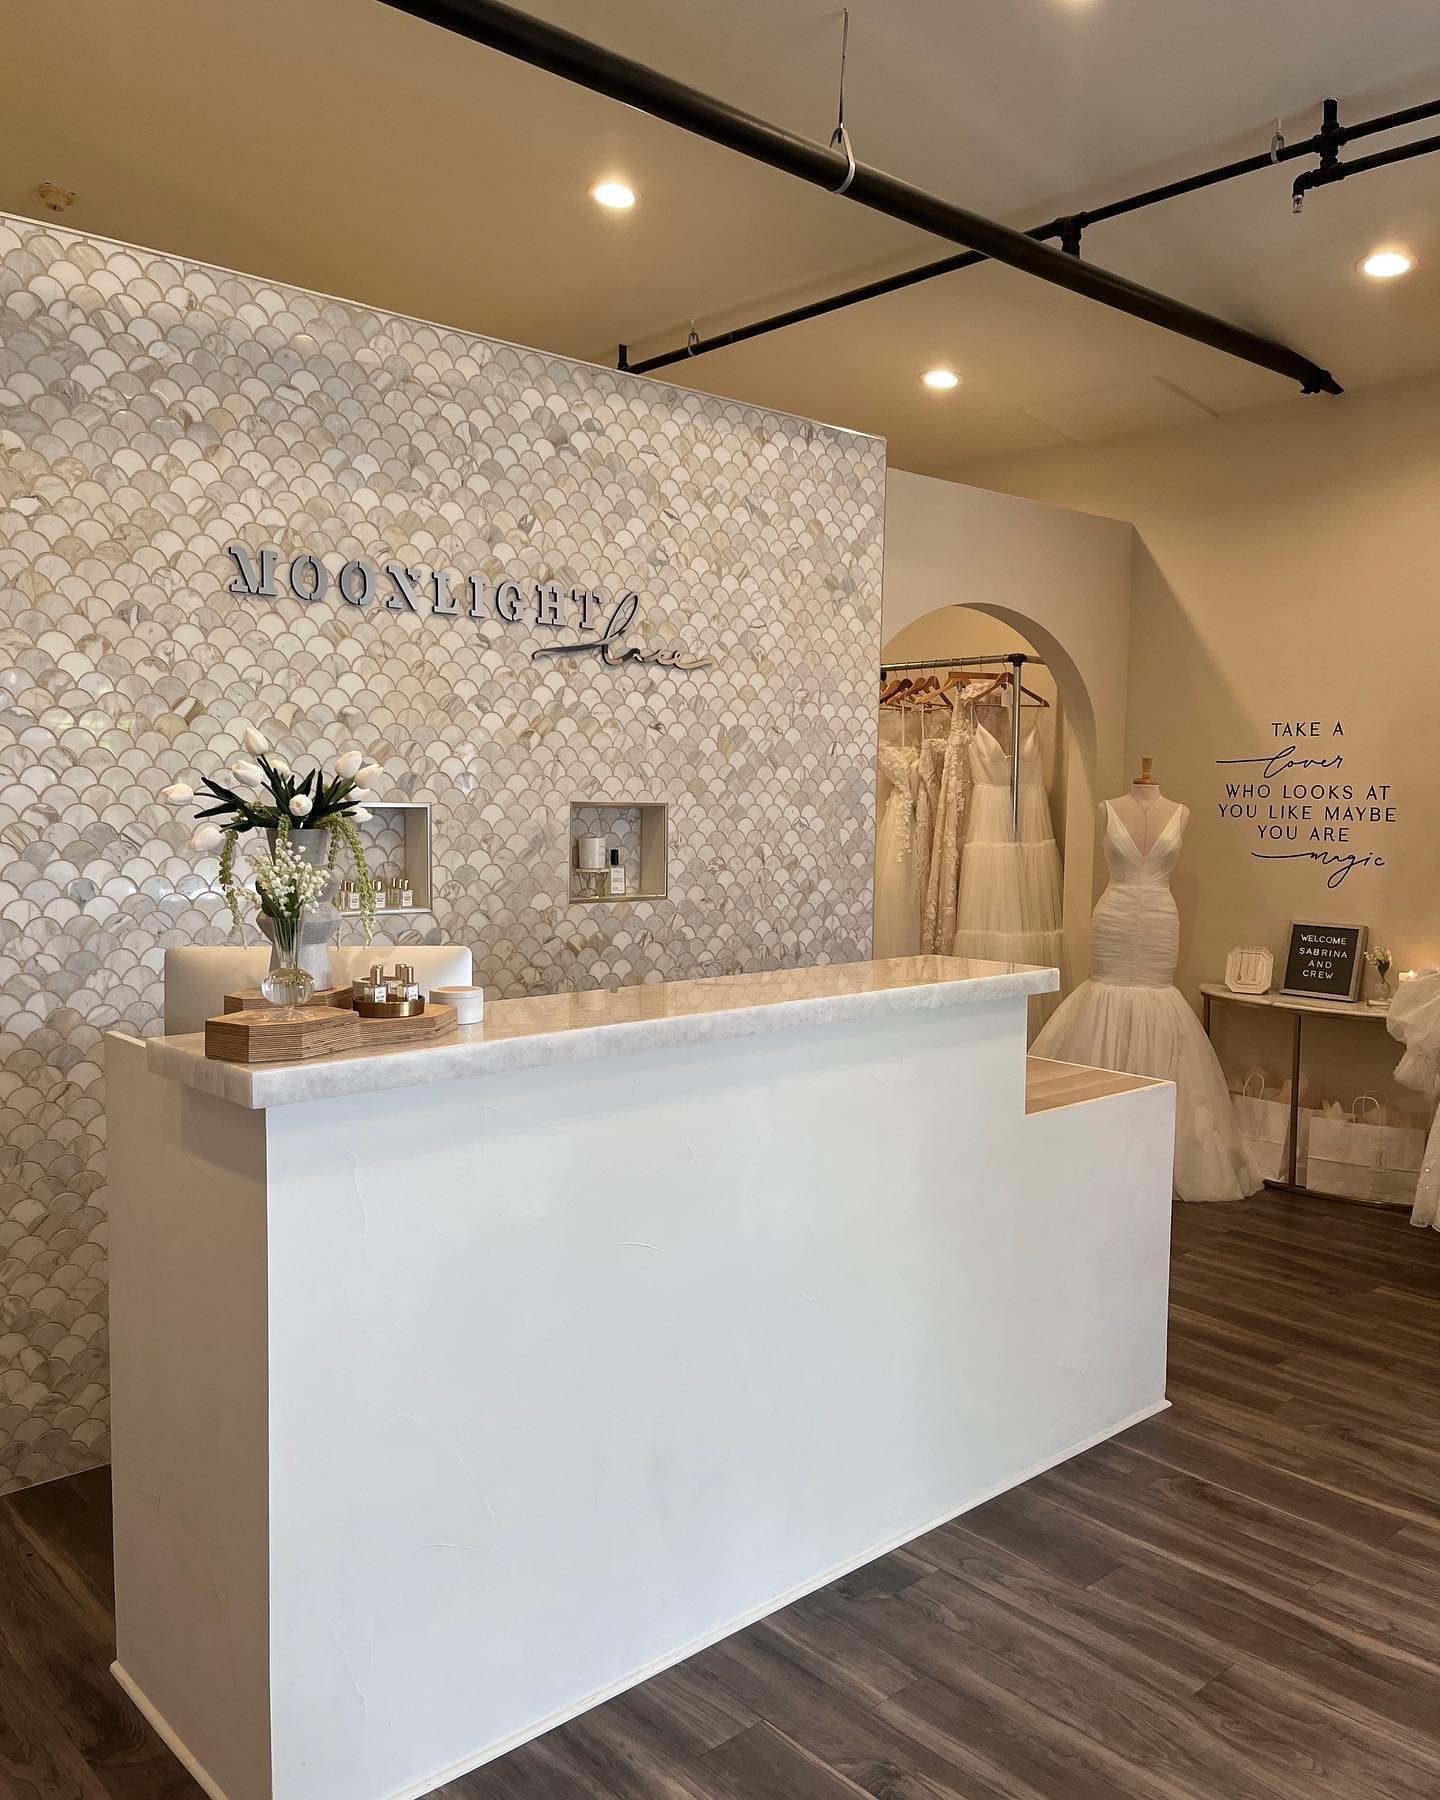 Pretty moments around our little bridal boutique in MidTown, Reno 🕊️ Our collection of modern wedding dresses is purposefully curated to make you feel confident, beautiful, and effortlessly you on your special day!

2025 Brides, we can&rsquo;t wait 